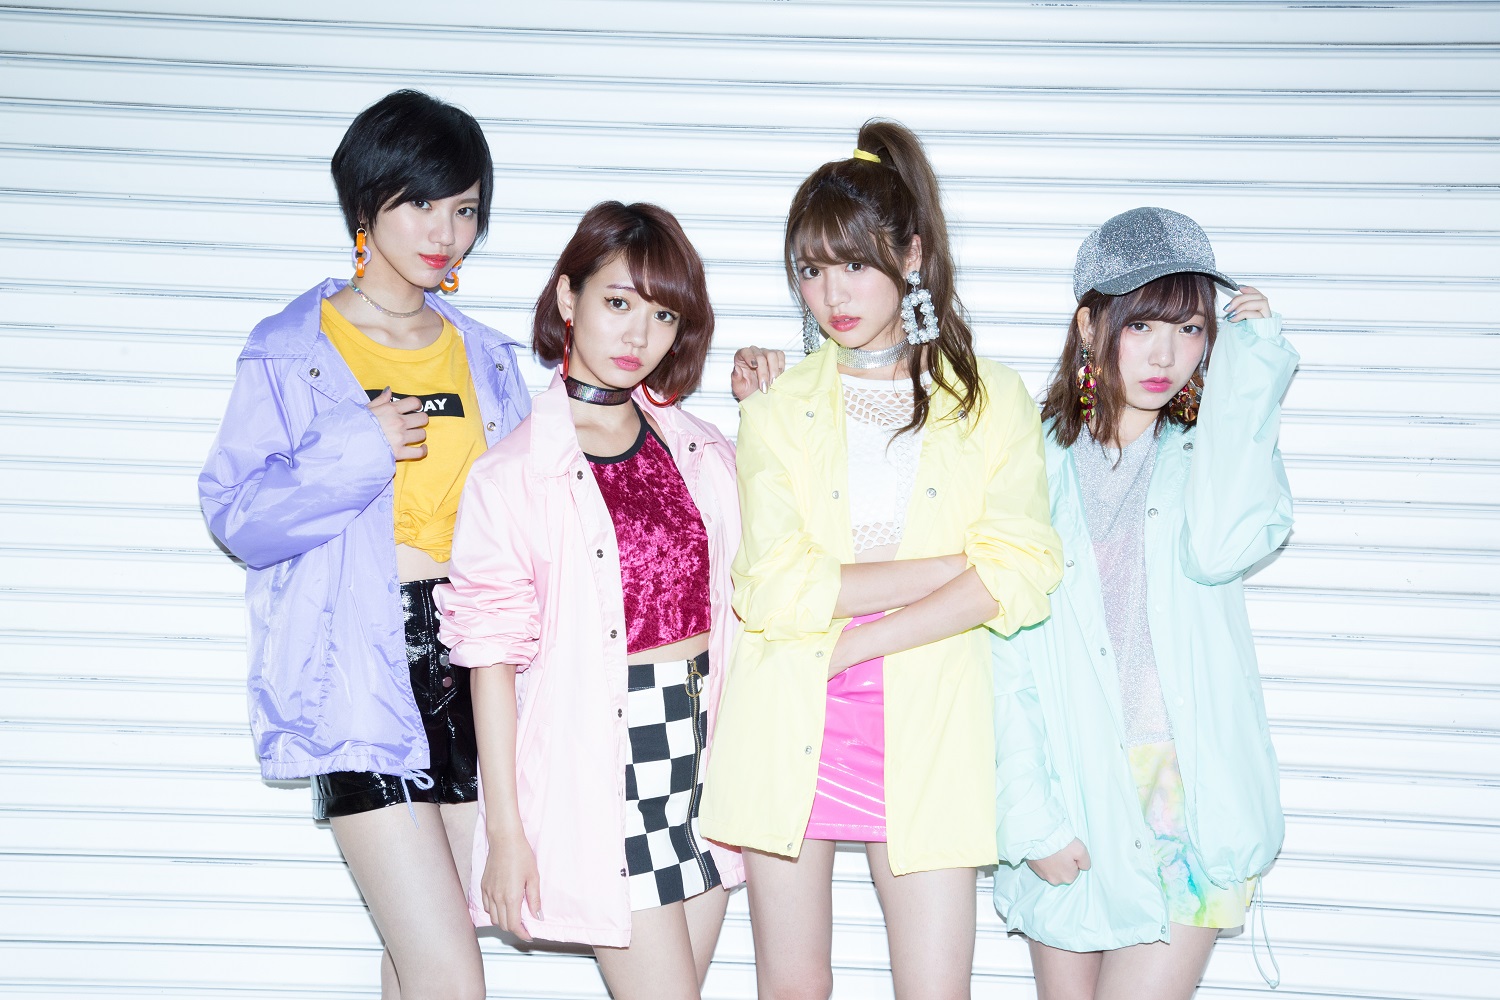 Yumemiru Adolescence Collaborate With MAMI (SCANDAL) on New Song “Exceeeed!!”